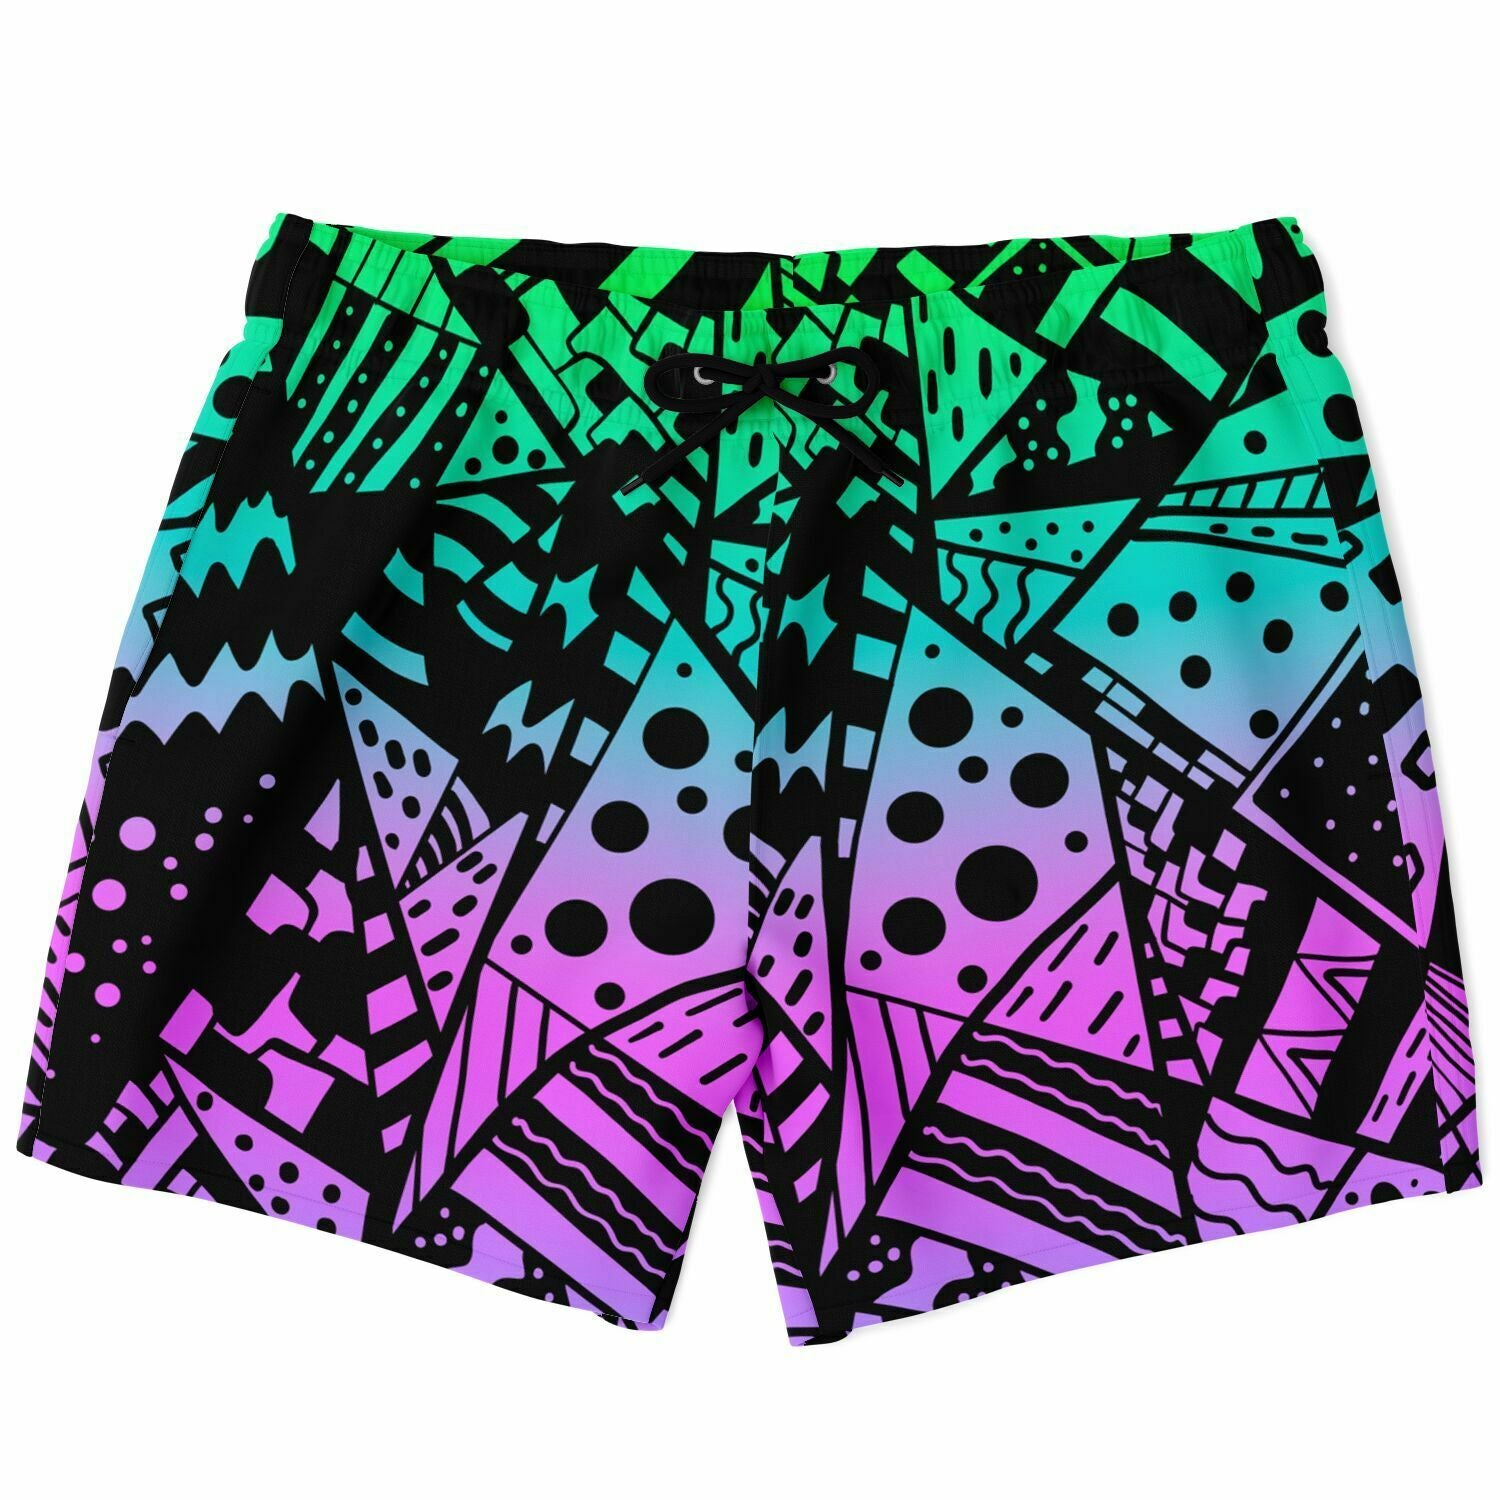 Colorful Abstract lines Swim Trunks with a geometric pattern.